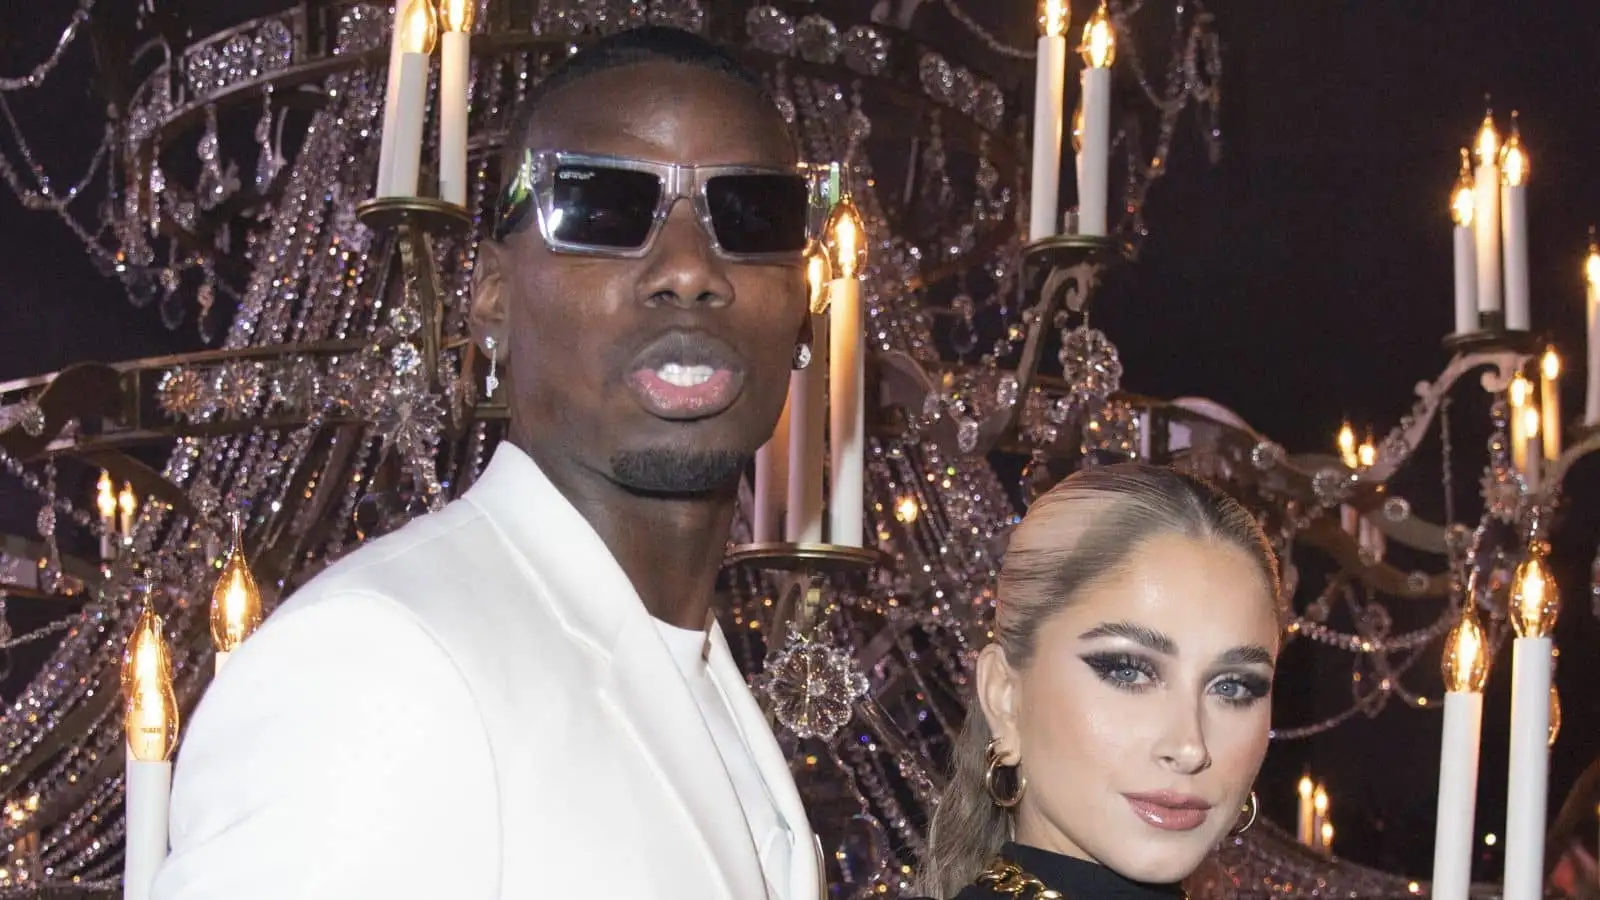 Manchester United star Paul Pogba with his wife .Zulay Pogba attending the Off-White Womenswear Fall/Winter 2022-2023 show Spaceship Earth: An "Imaginary Experience" at Palais Brongniart during Paris Fashion Week in Paris, France on February 28, 2022